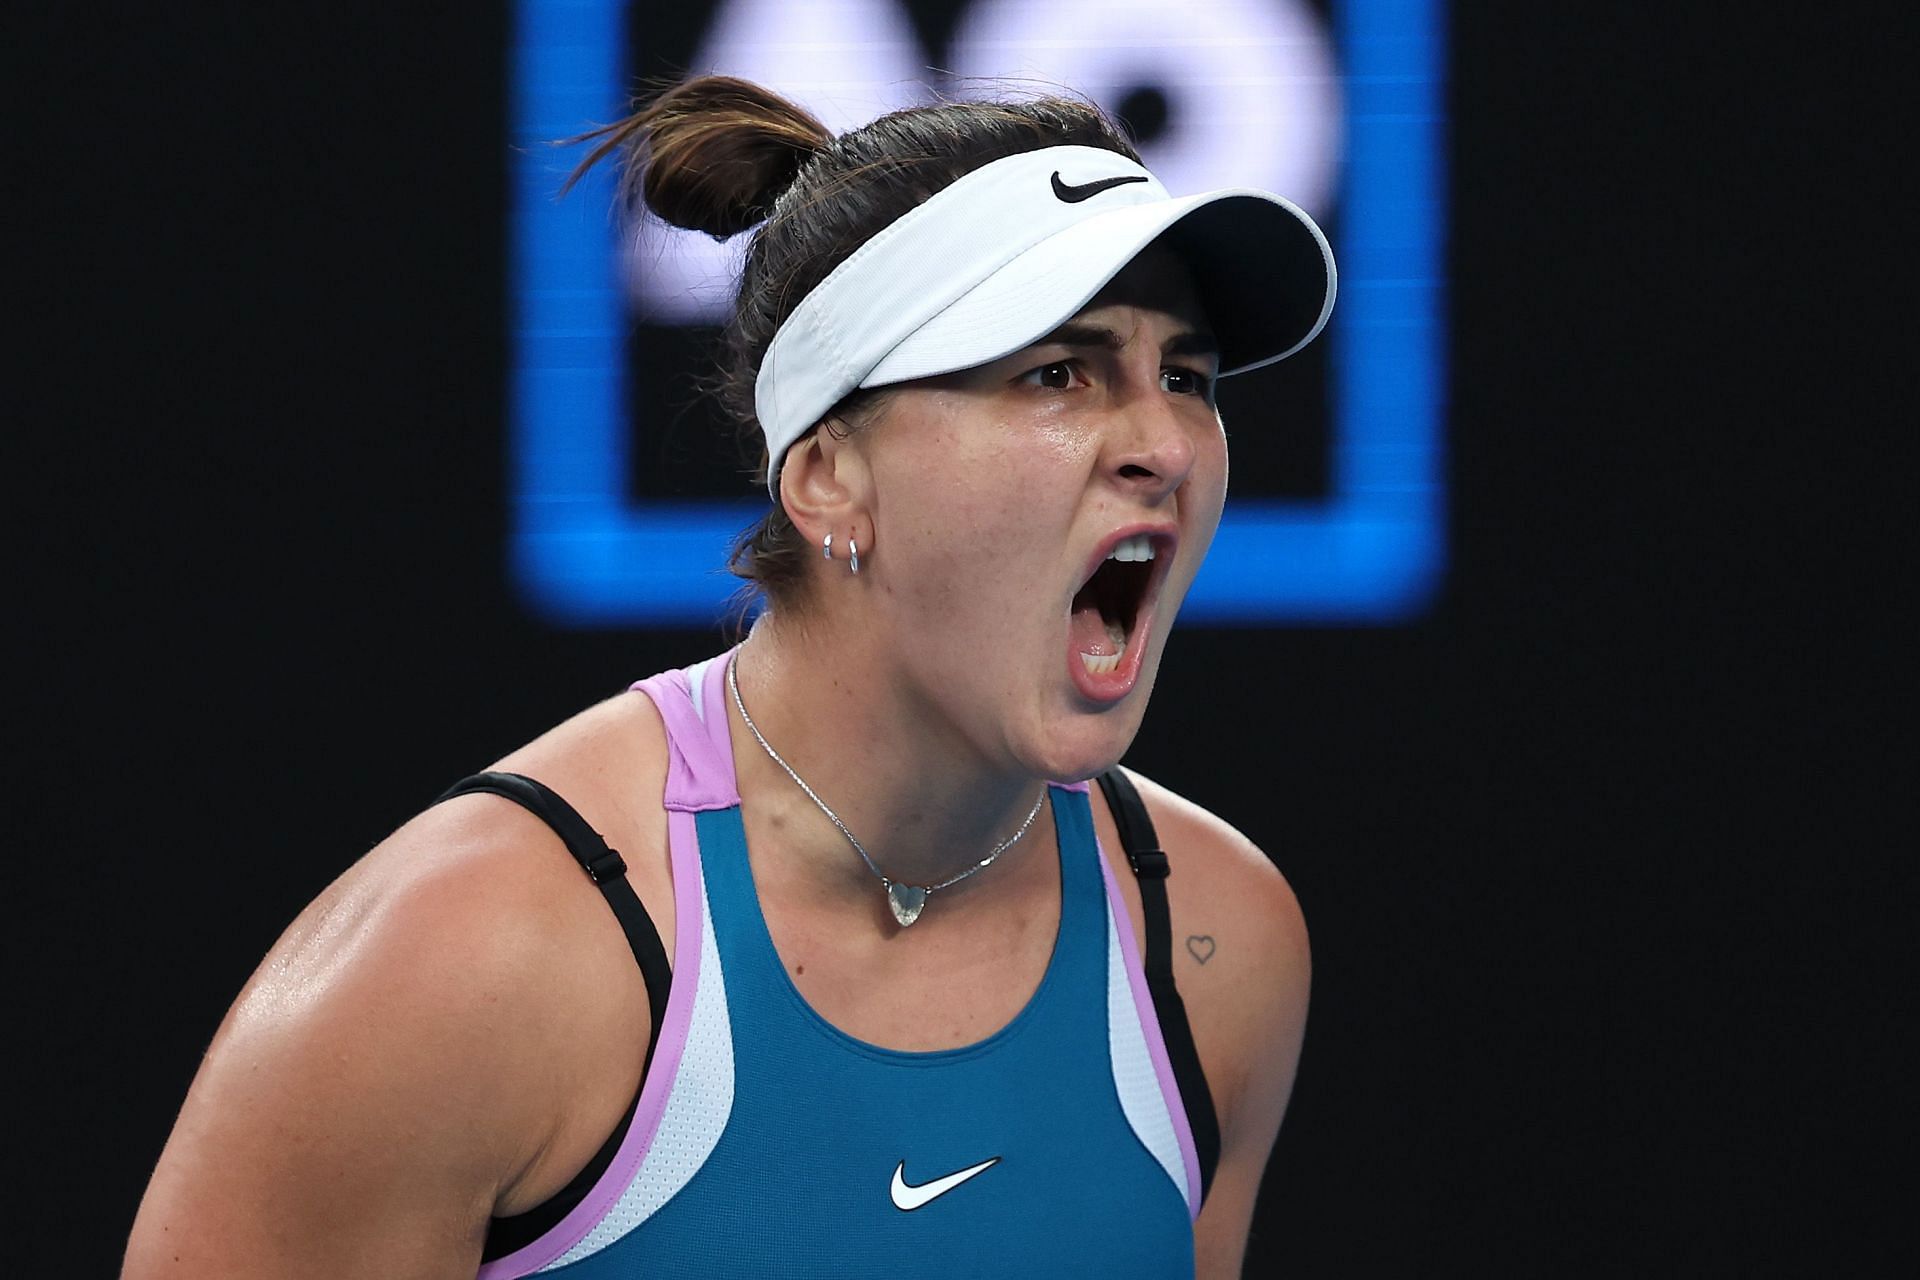 Andreescu reacts during a point at the 2023 Australian Open